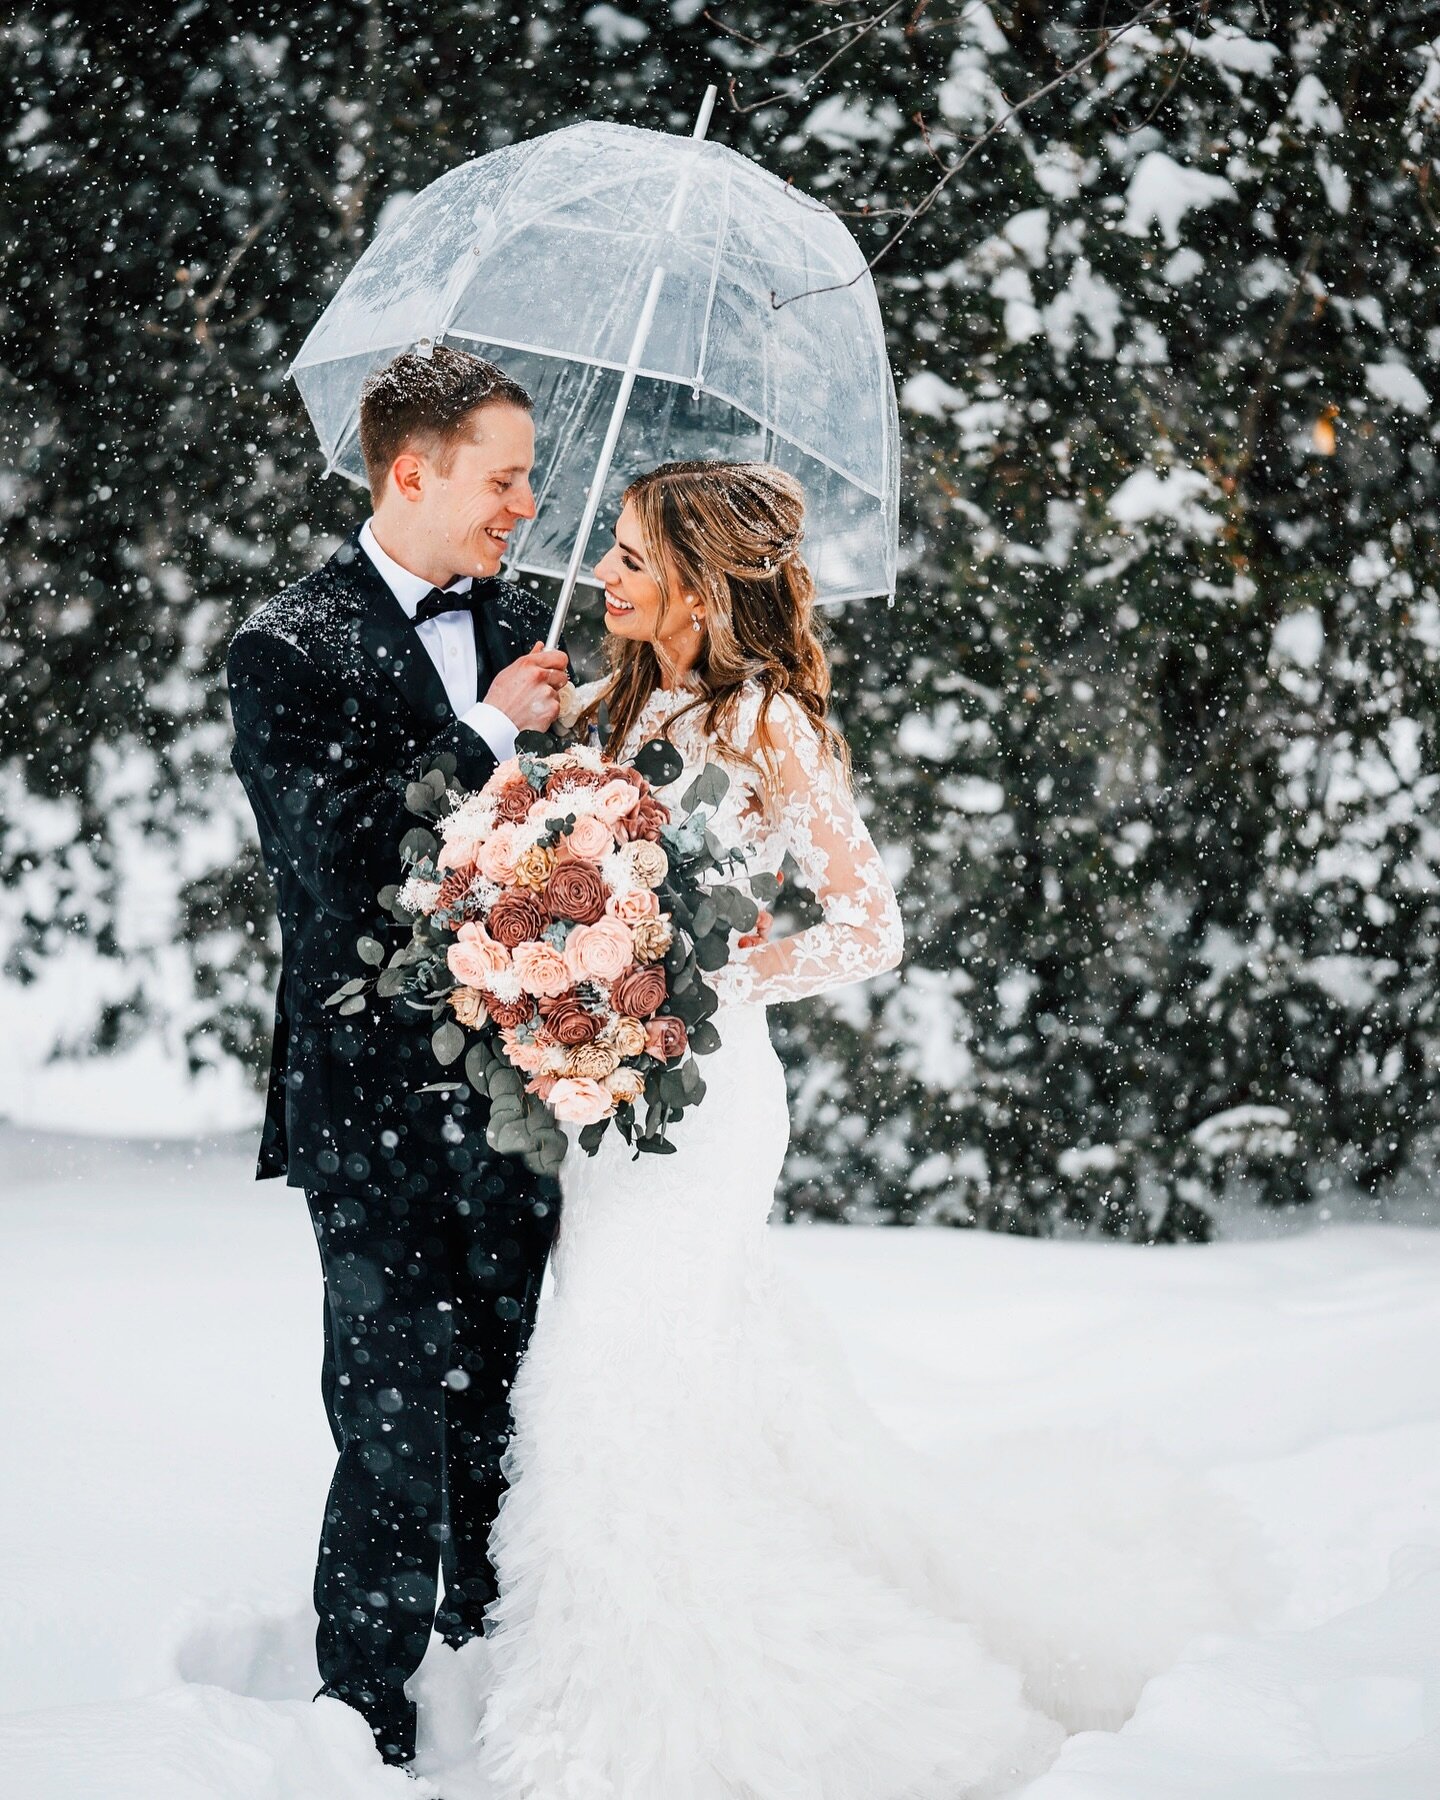 Today was a true dream come true. Hannah + Sean hoped for snow on their wedding day and oh did they get it! Married in a snowstorm in the heart of the White Mountains. Congratulations friends! ❄️ #jacksonnh #visitnh #nhwedding #whitemountains #caitbo